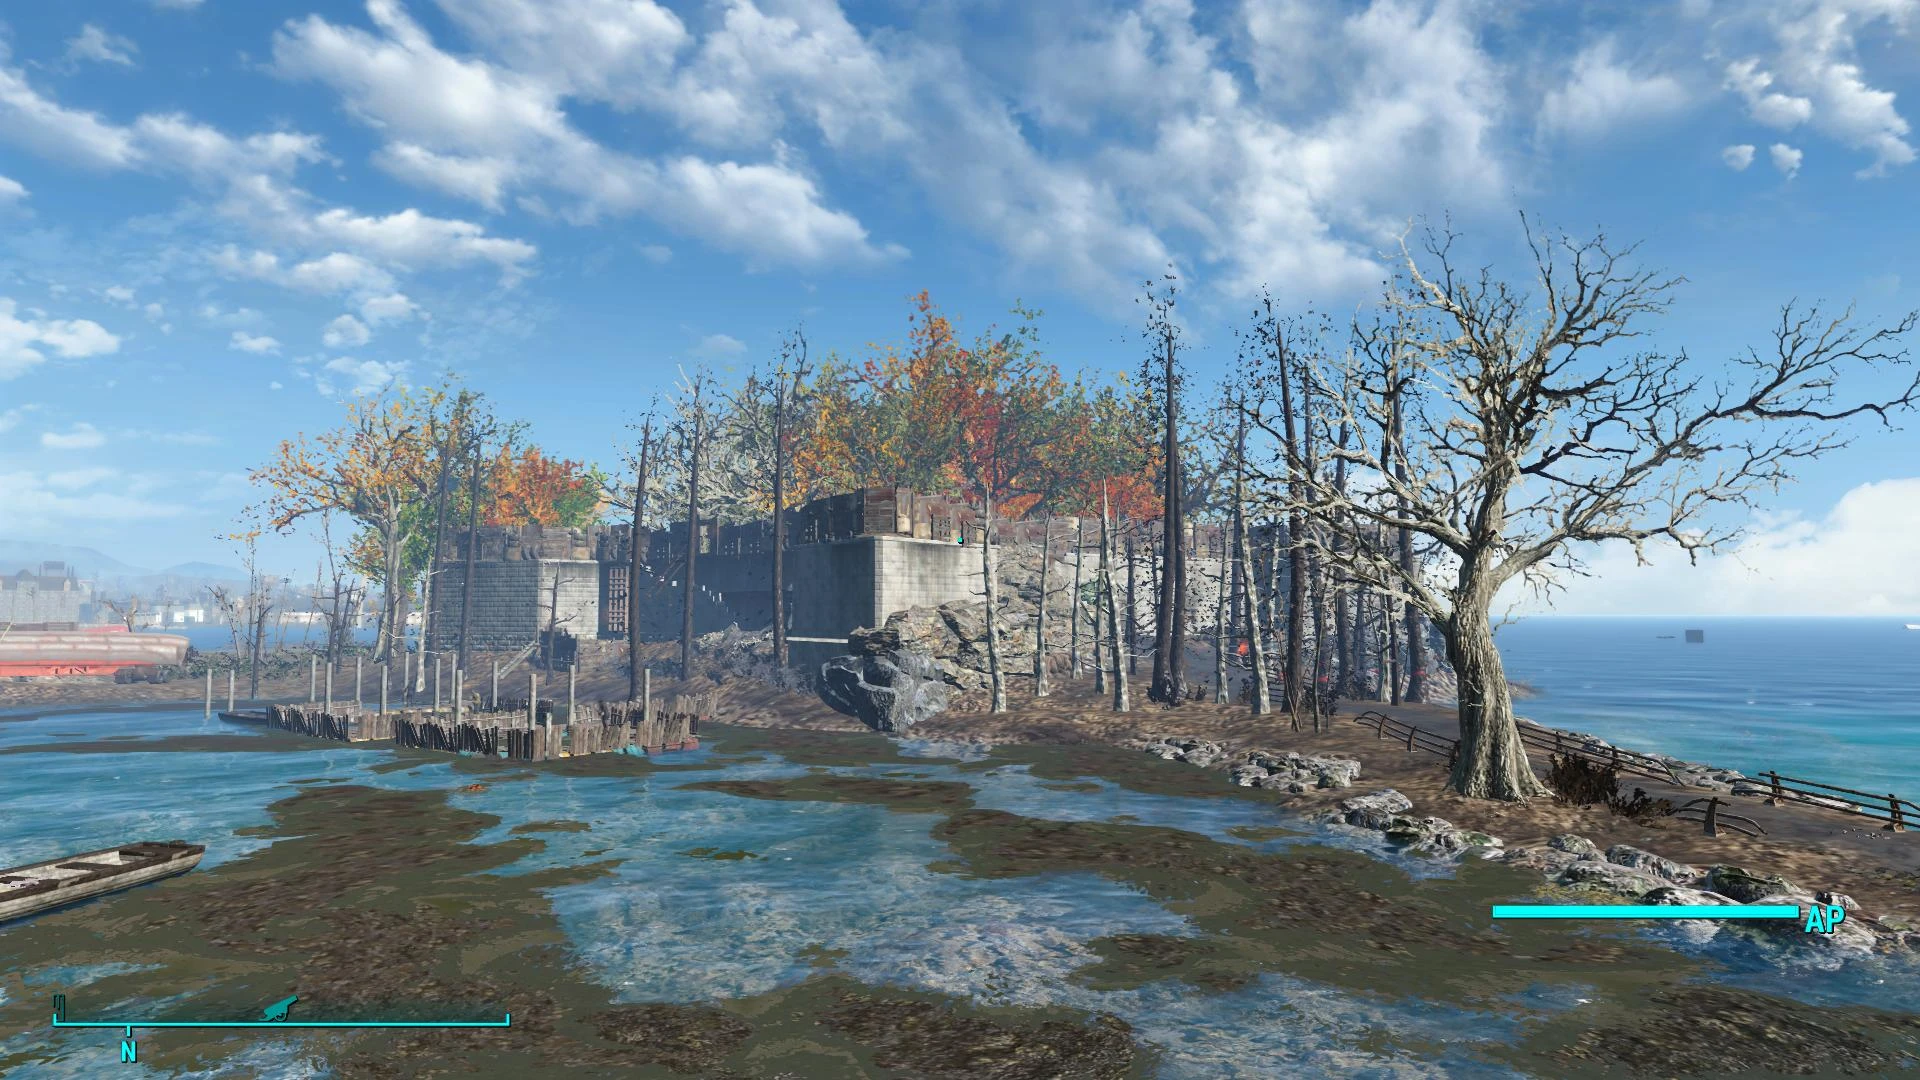 fallout 4 overgrowth mod download